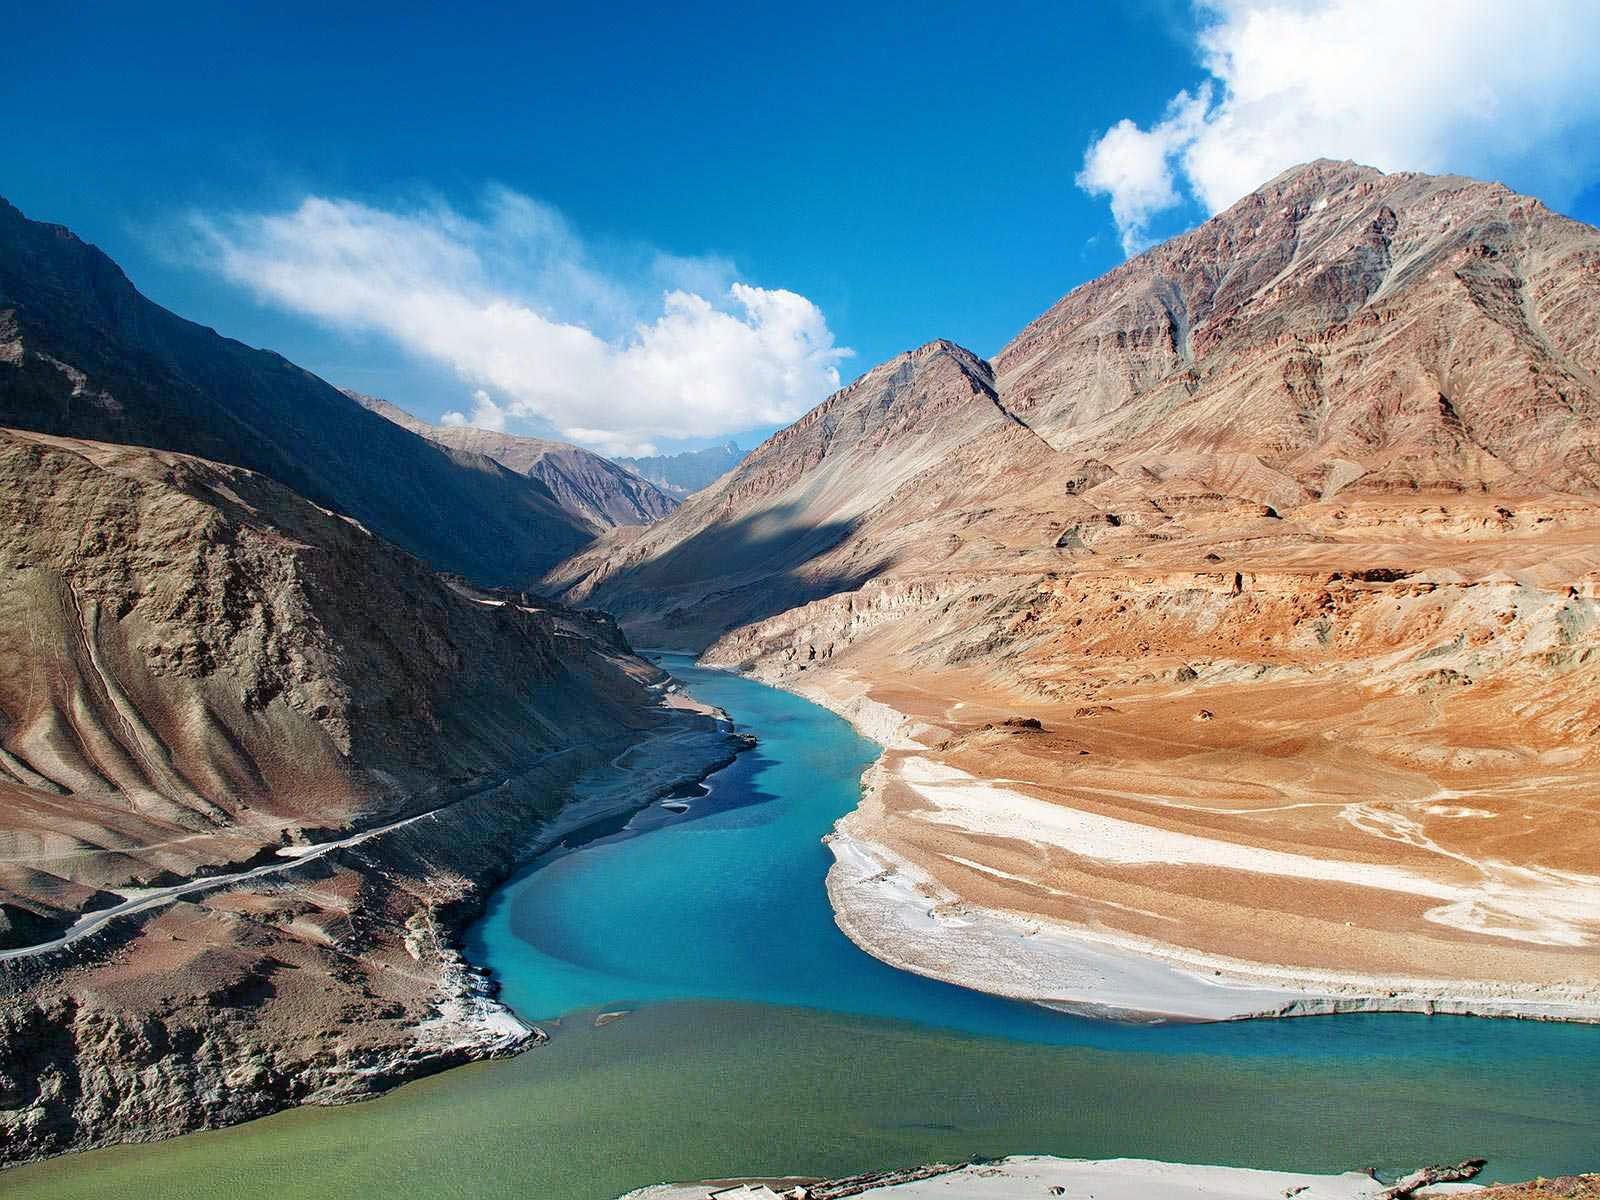 The Confluence – Indus & Zanskar - At times, at the Sangam, the Indus River can be seen as shiny blue while the Zanskar river is dirty green